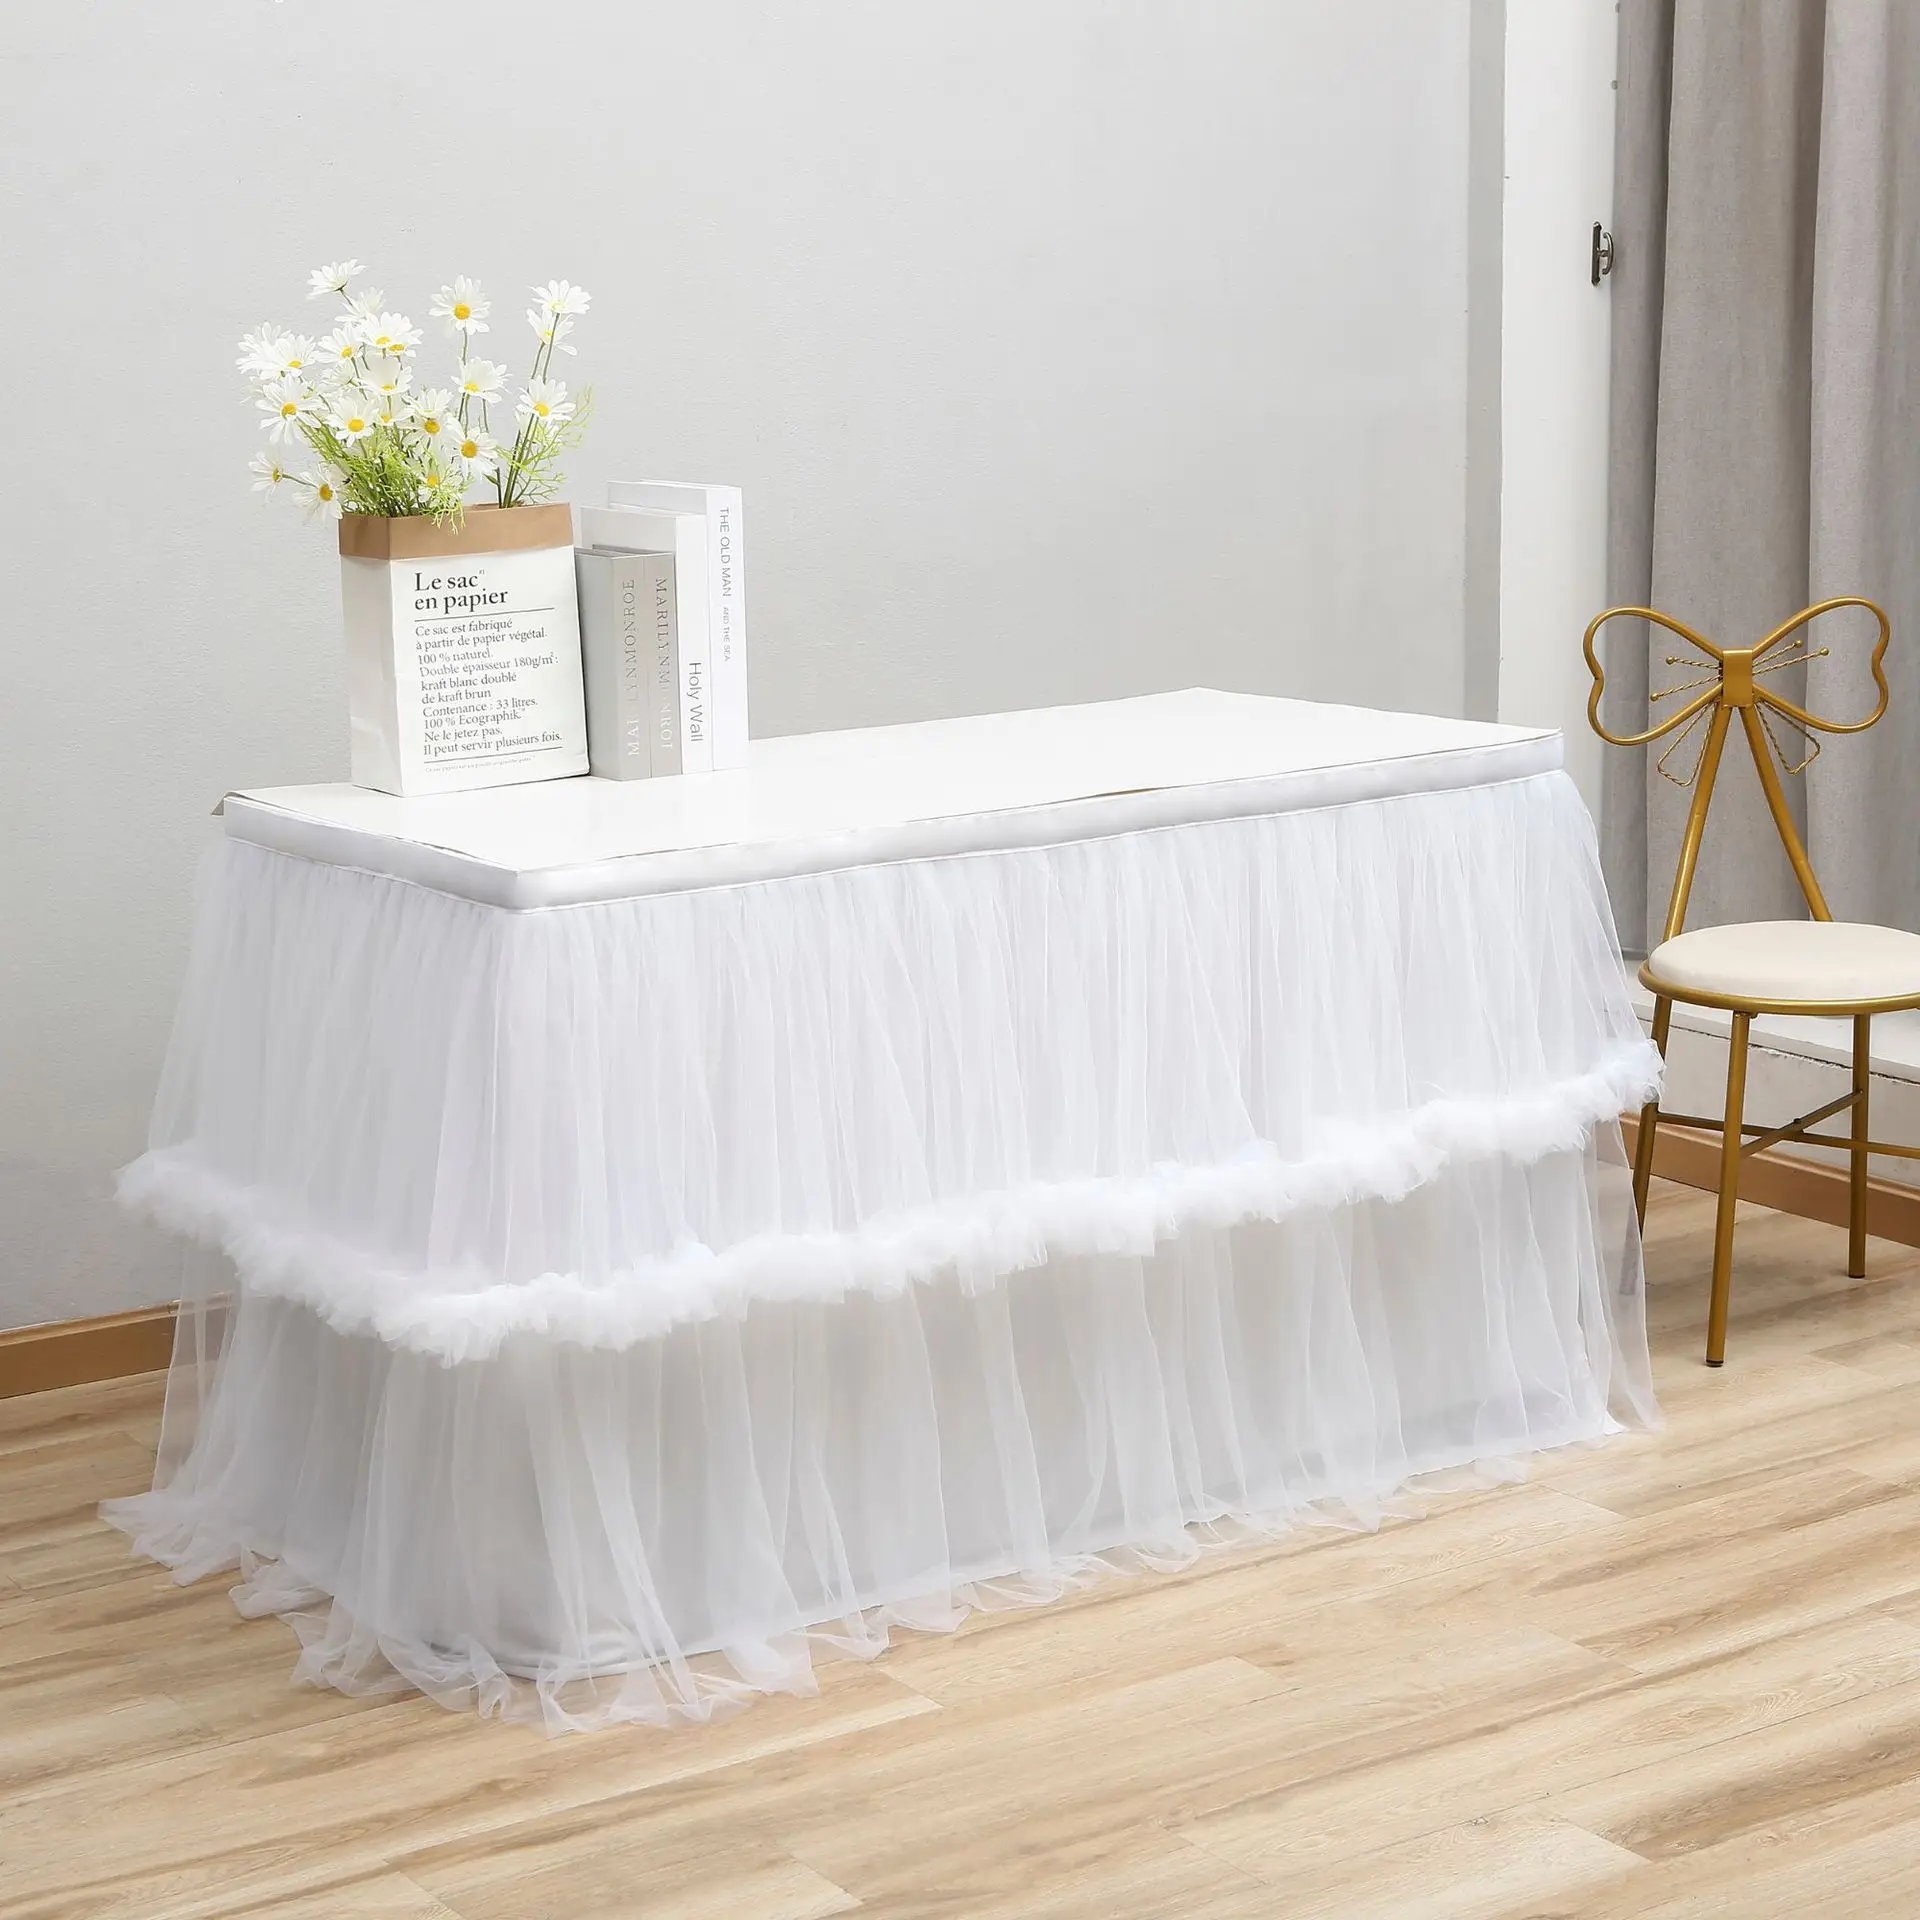 White Tutu Tulle Table Skirt Cloth for Christmas Party Wedding Home Decoration 